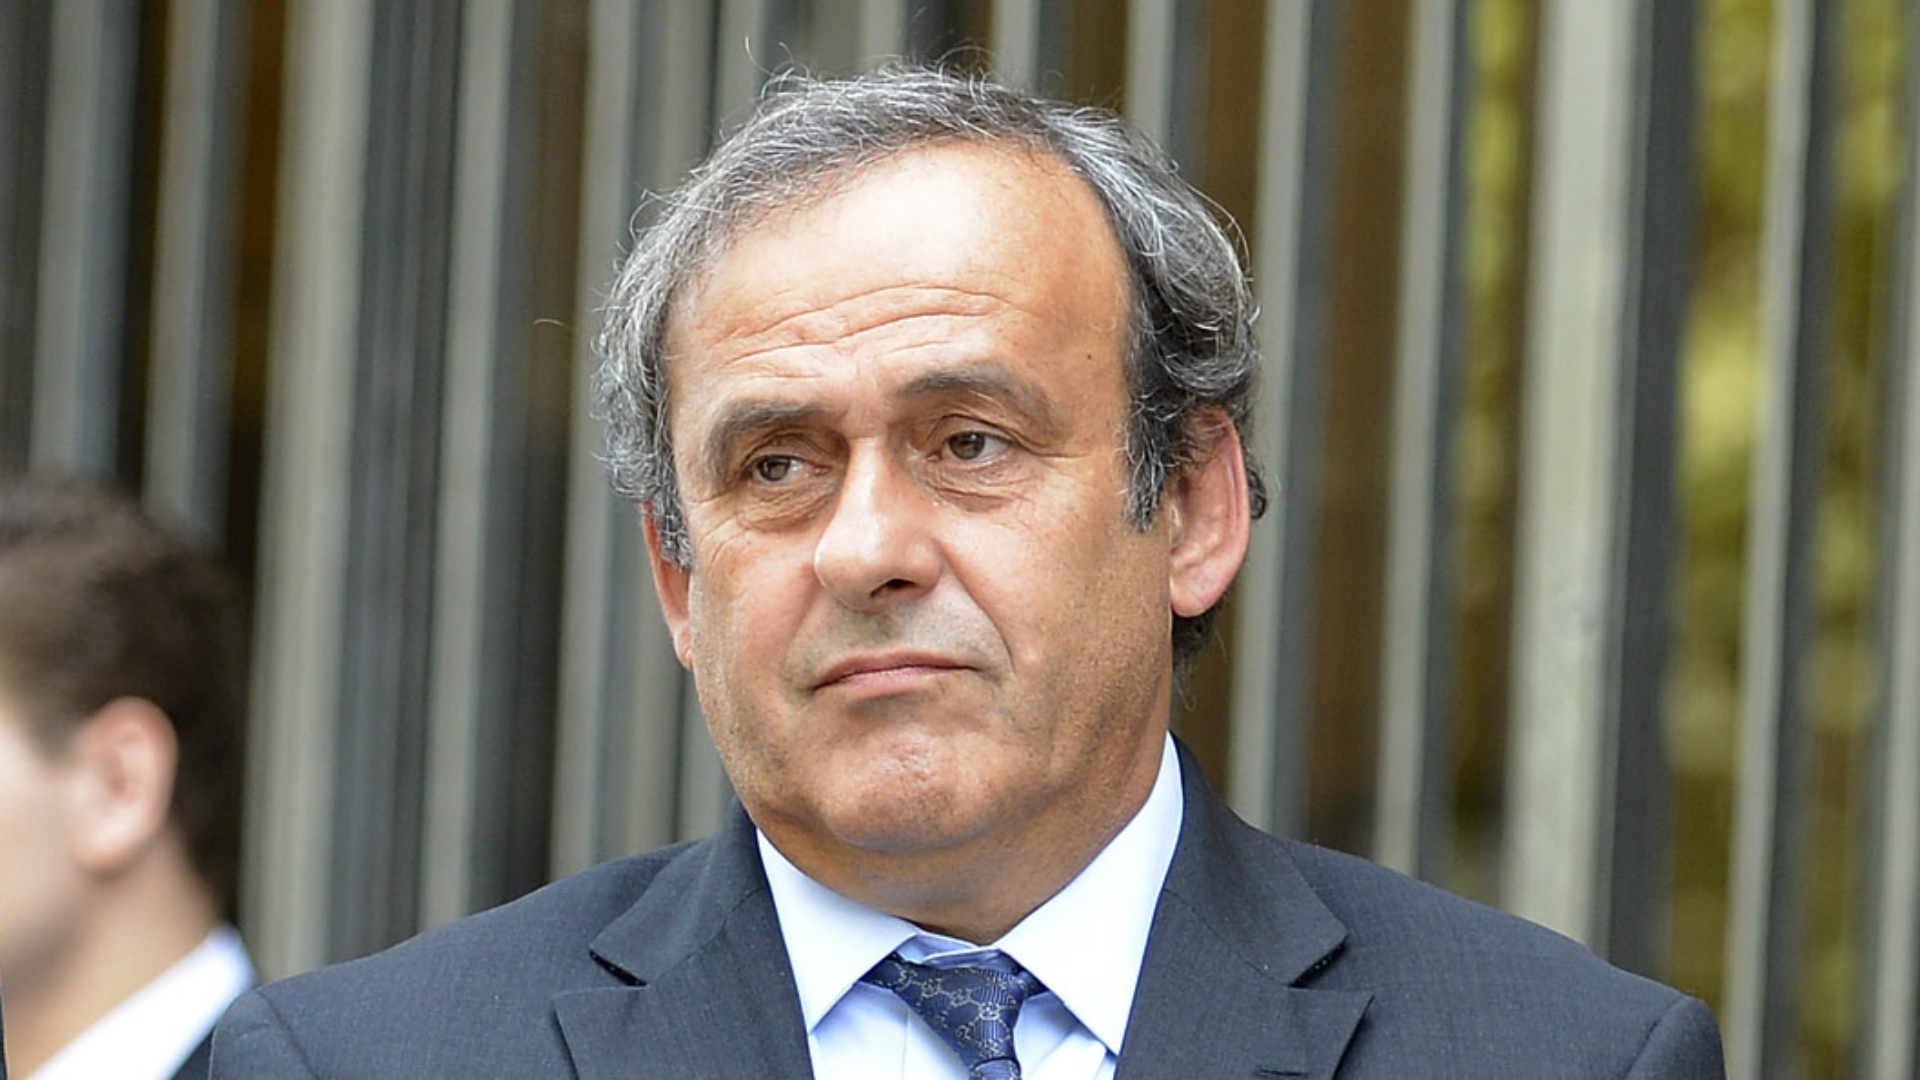 Michel Platini is confident about the future after being questioned by police about the Qatar 2022 World Cup bid, according to his lawyer.